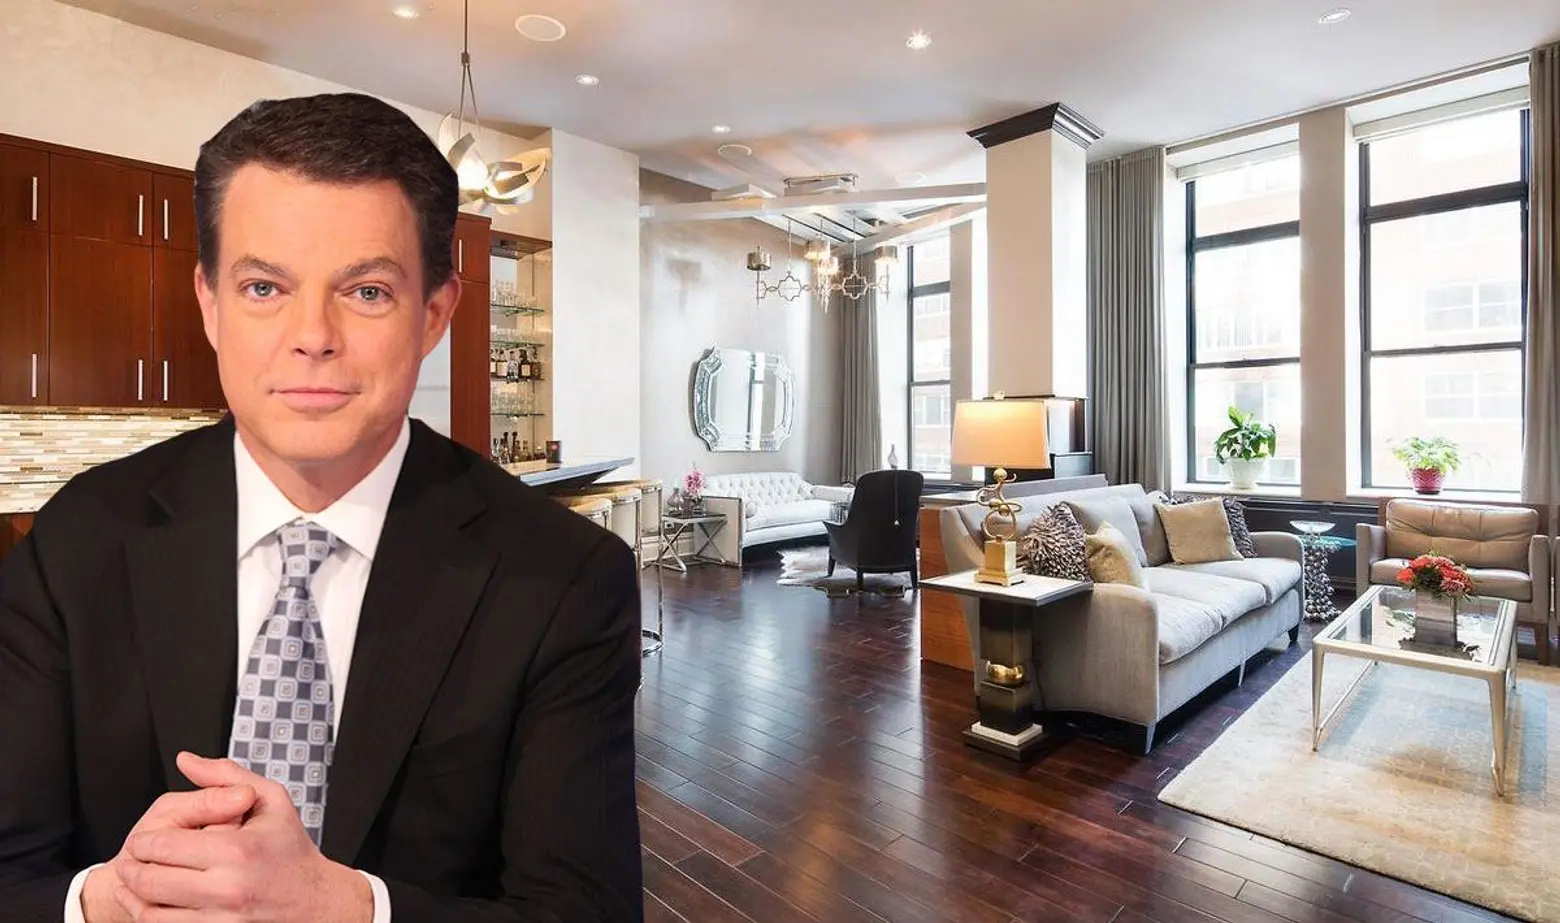 Fox News anchor Shepard Smith lists upscale Greenwich Village condo for $5M